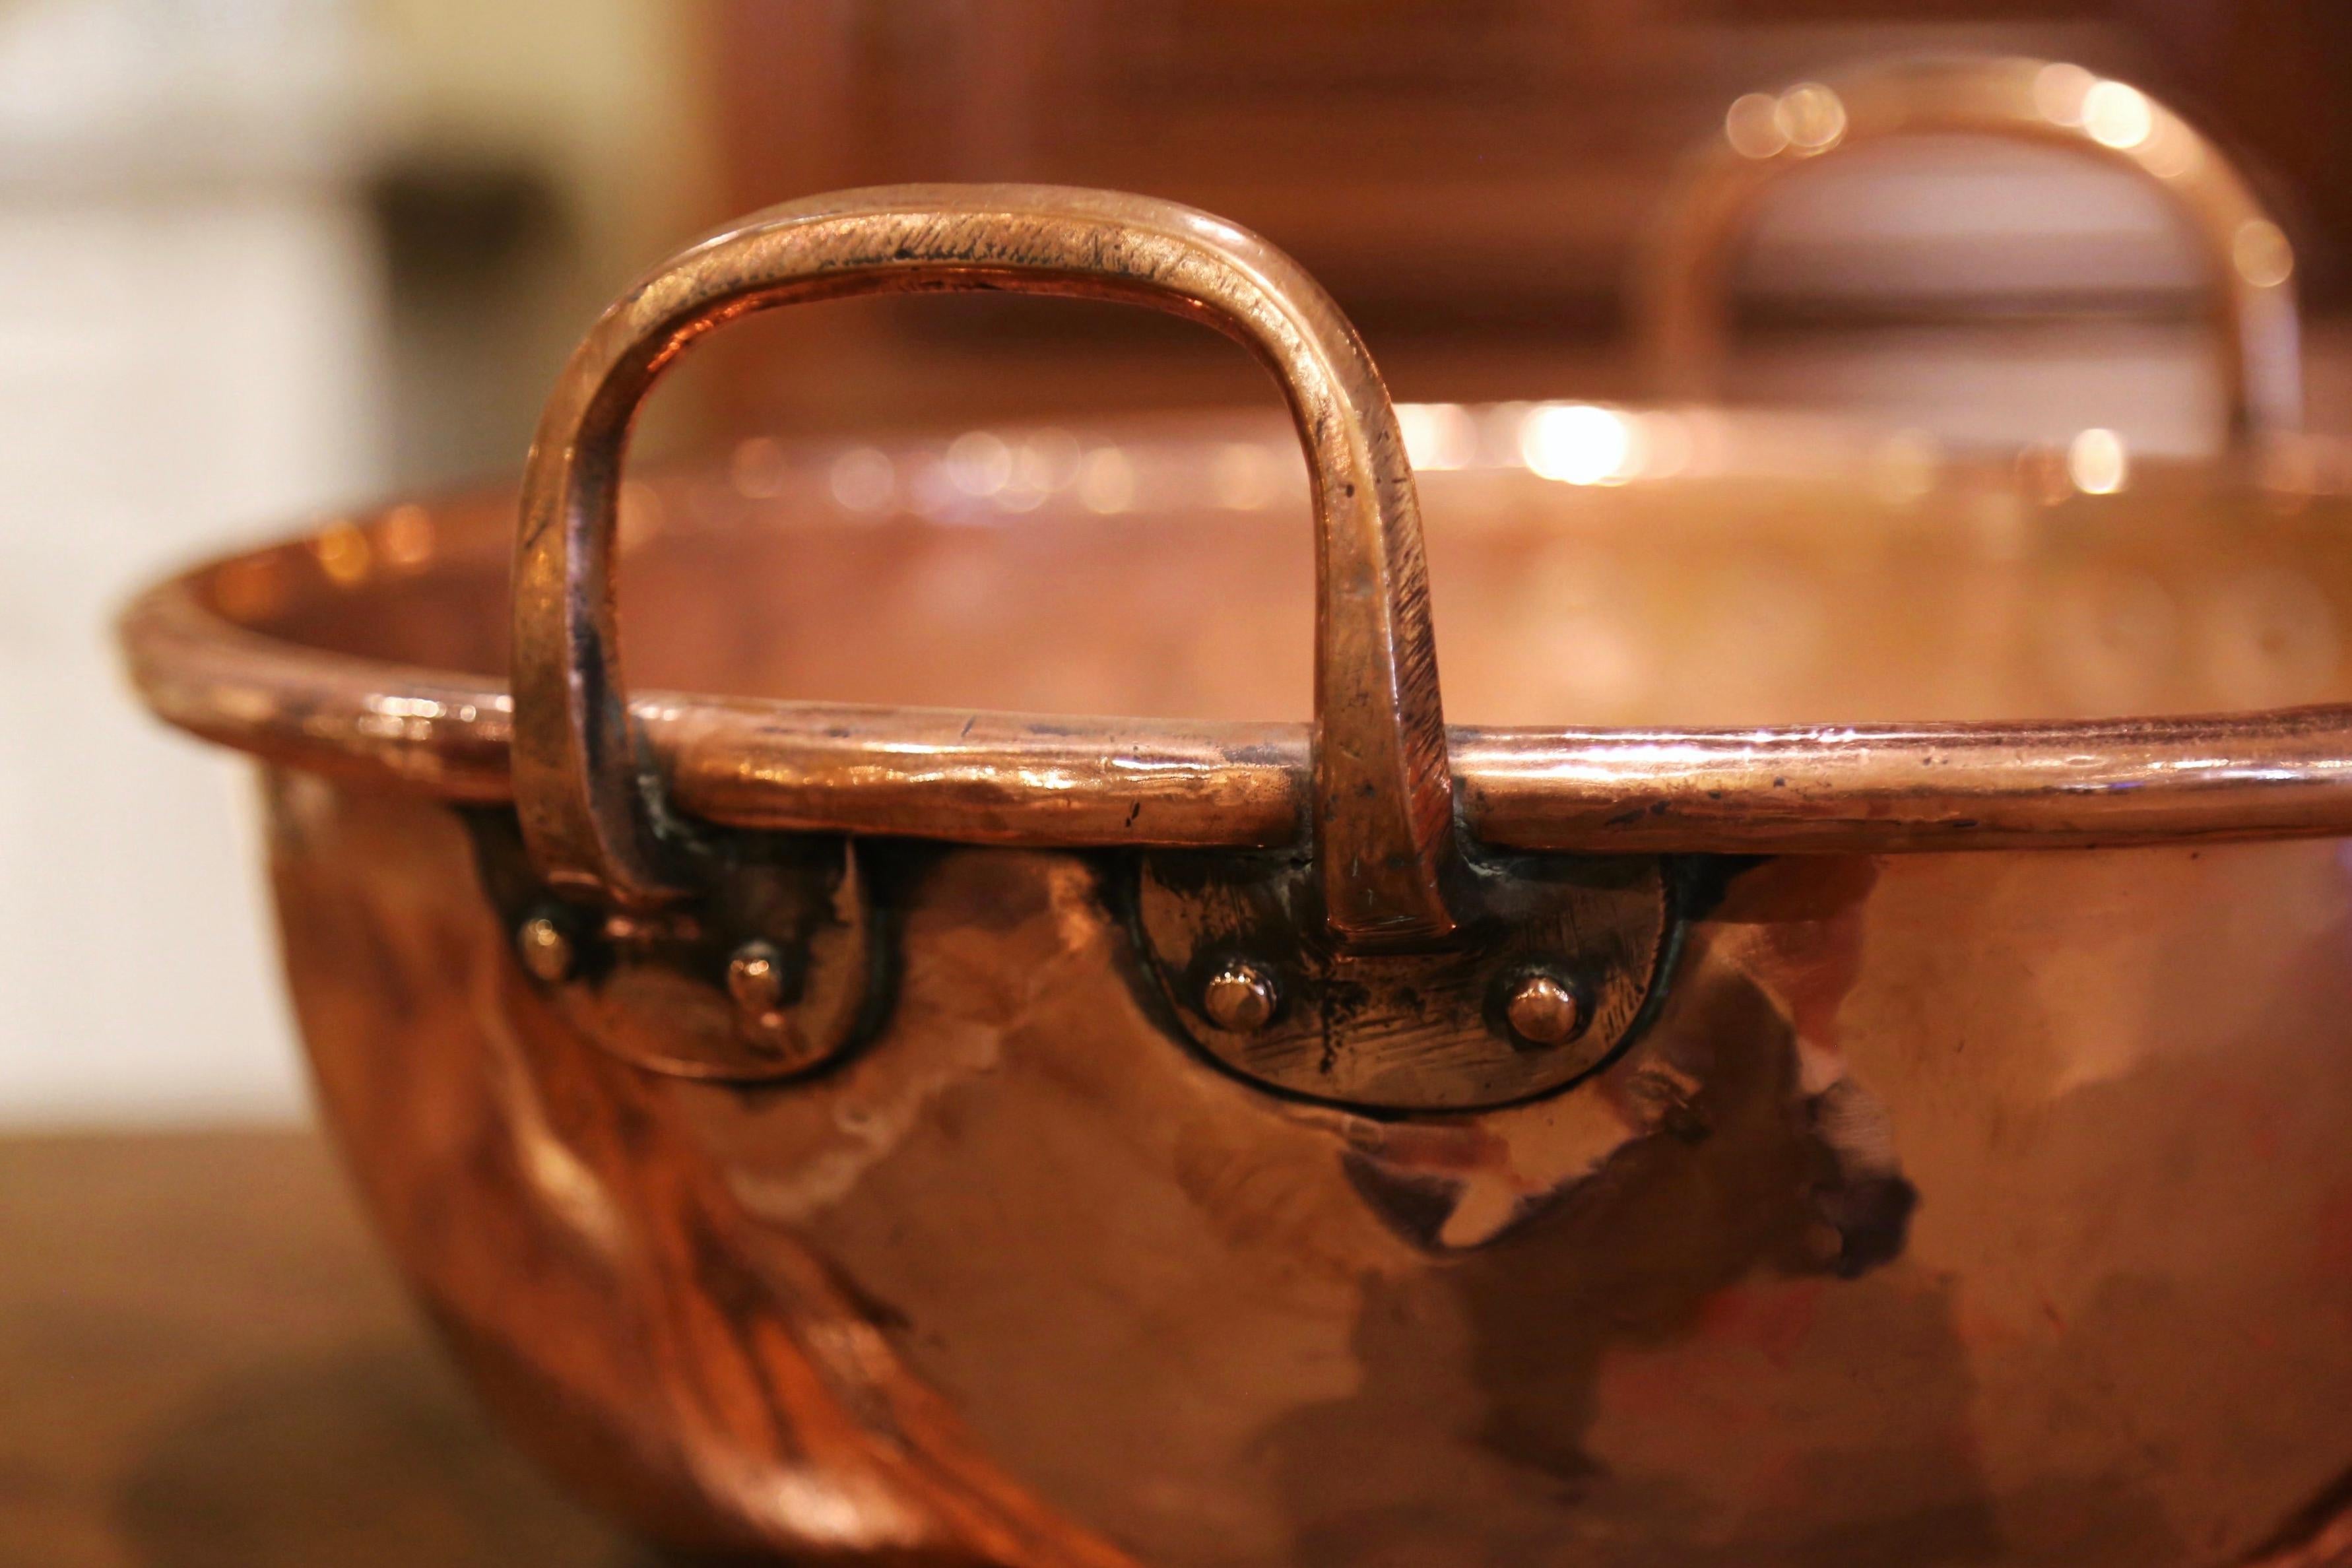 Hand-Crafted Mid-19th Century French Copper Jelly and Jam Boiling Bowl with Brass Handles